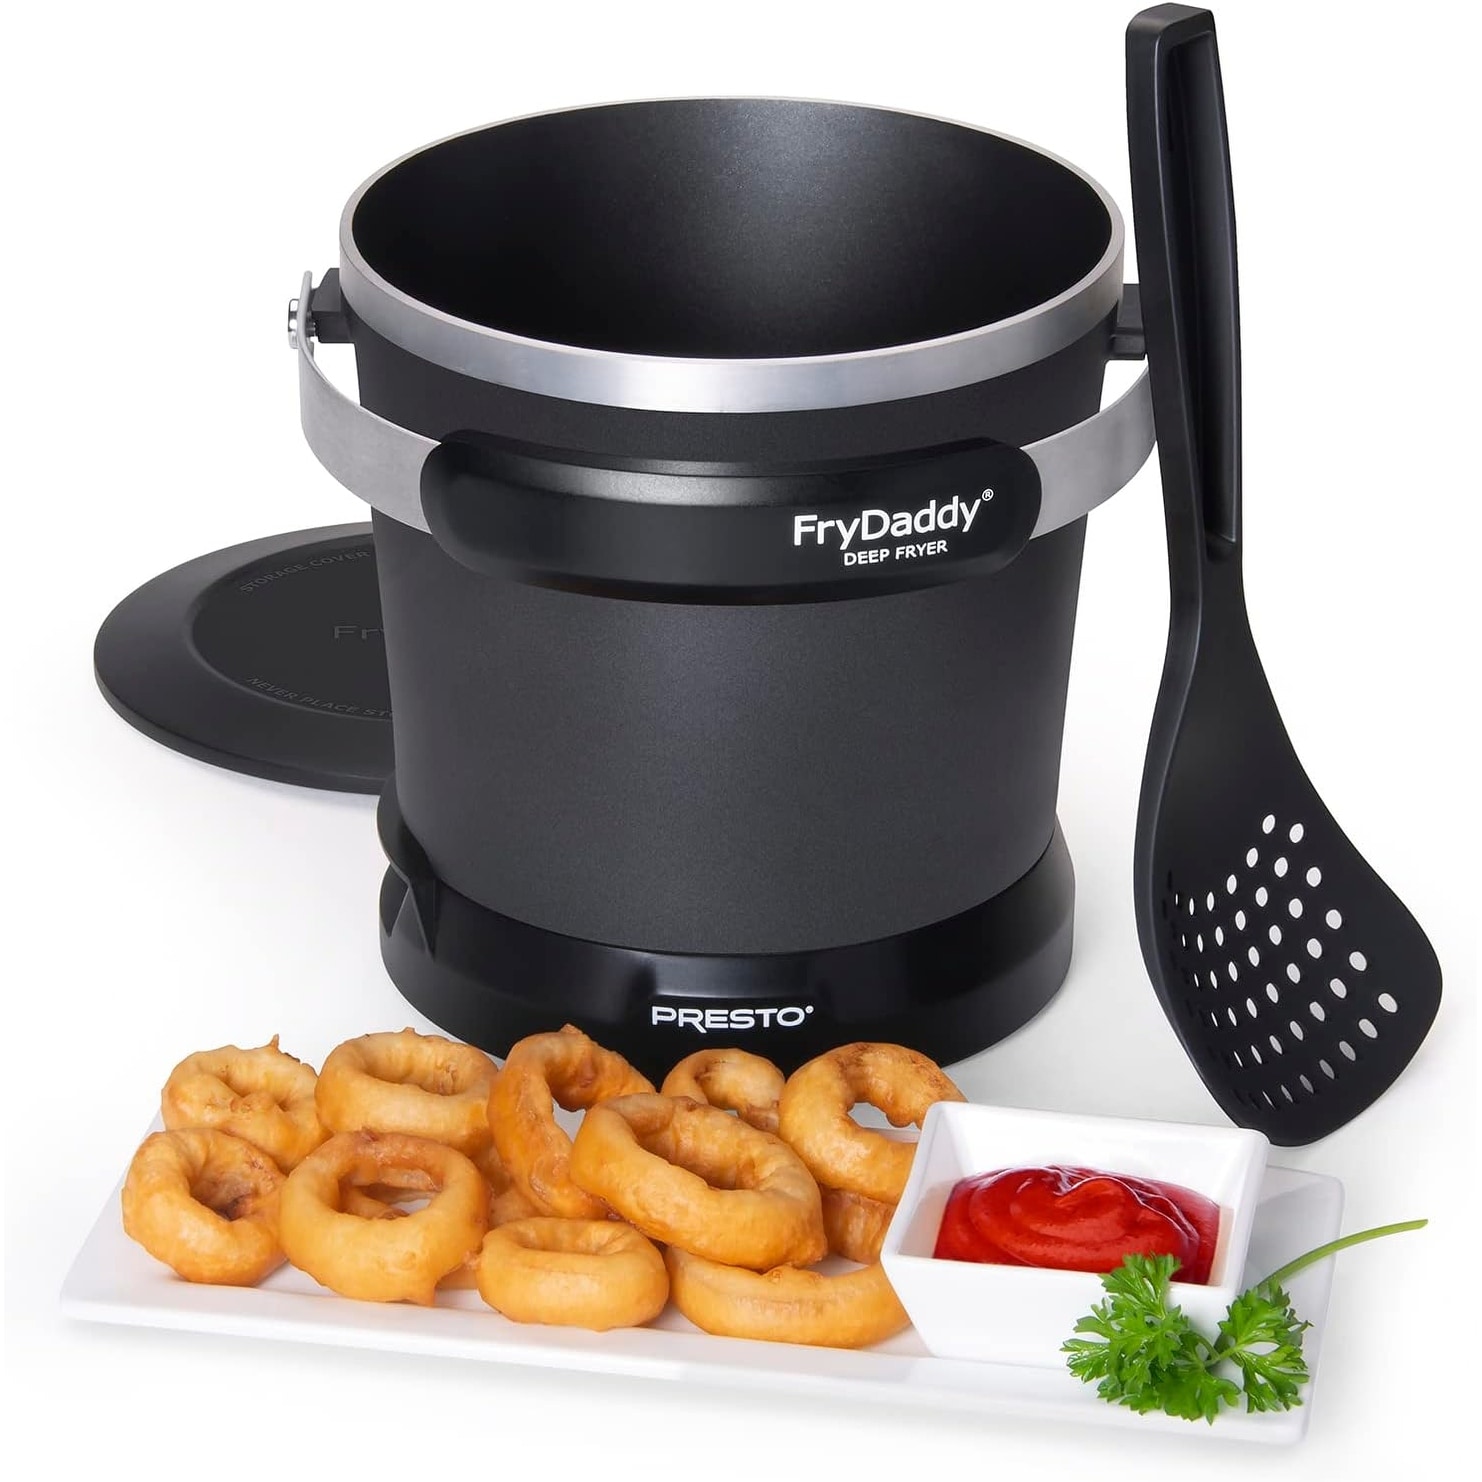 https://ak1.ostkcdn.com/images/products/is/images/direct/d28ad16d050fb649ce236e0738956e7dbed7f684/Presto-Fry-Daddy-Deep-Fryer.jpg